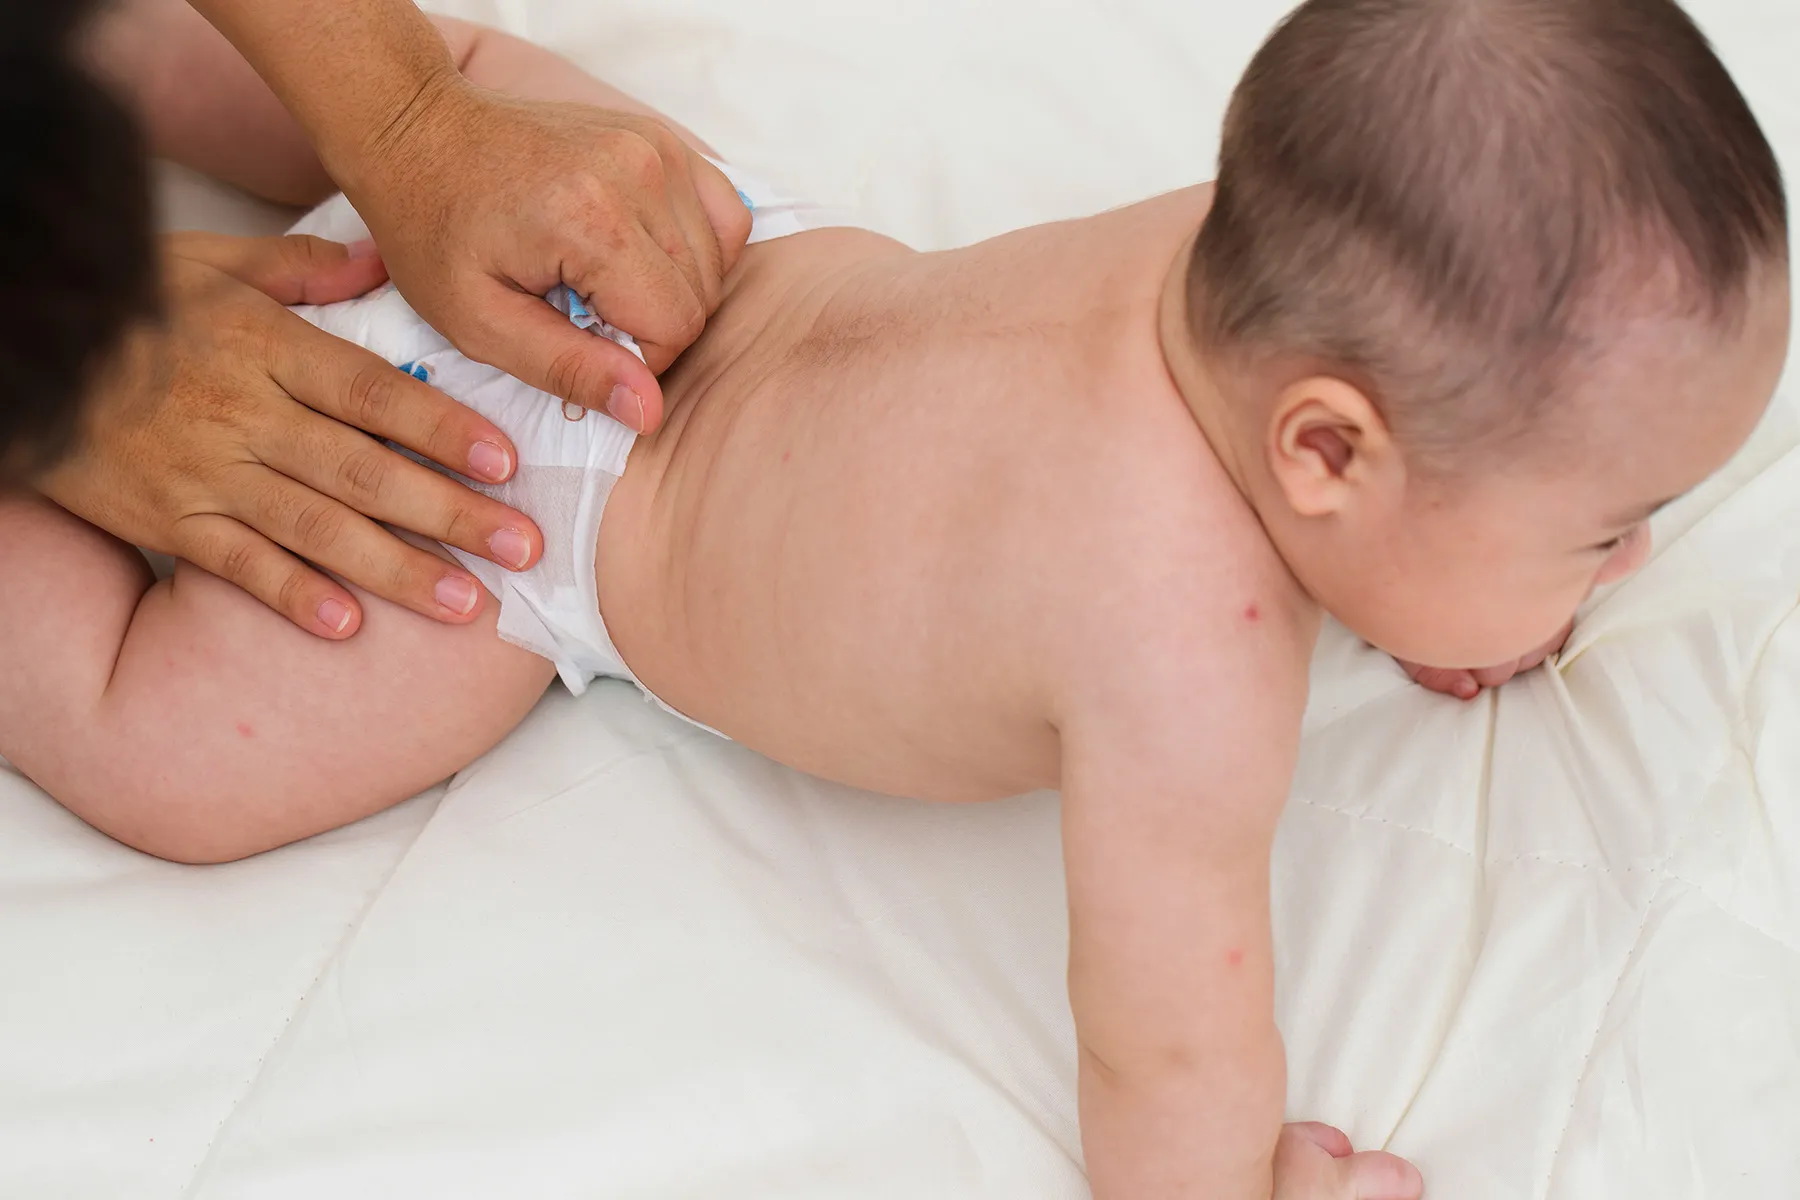 Thousands of New Viruses Found in Baby Diapers